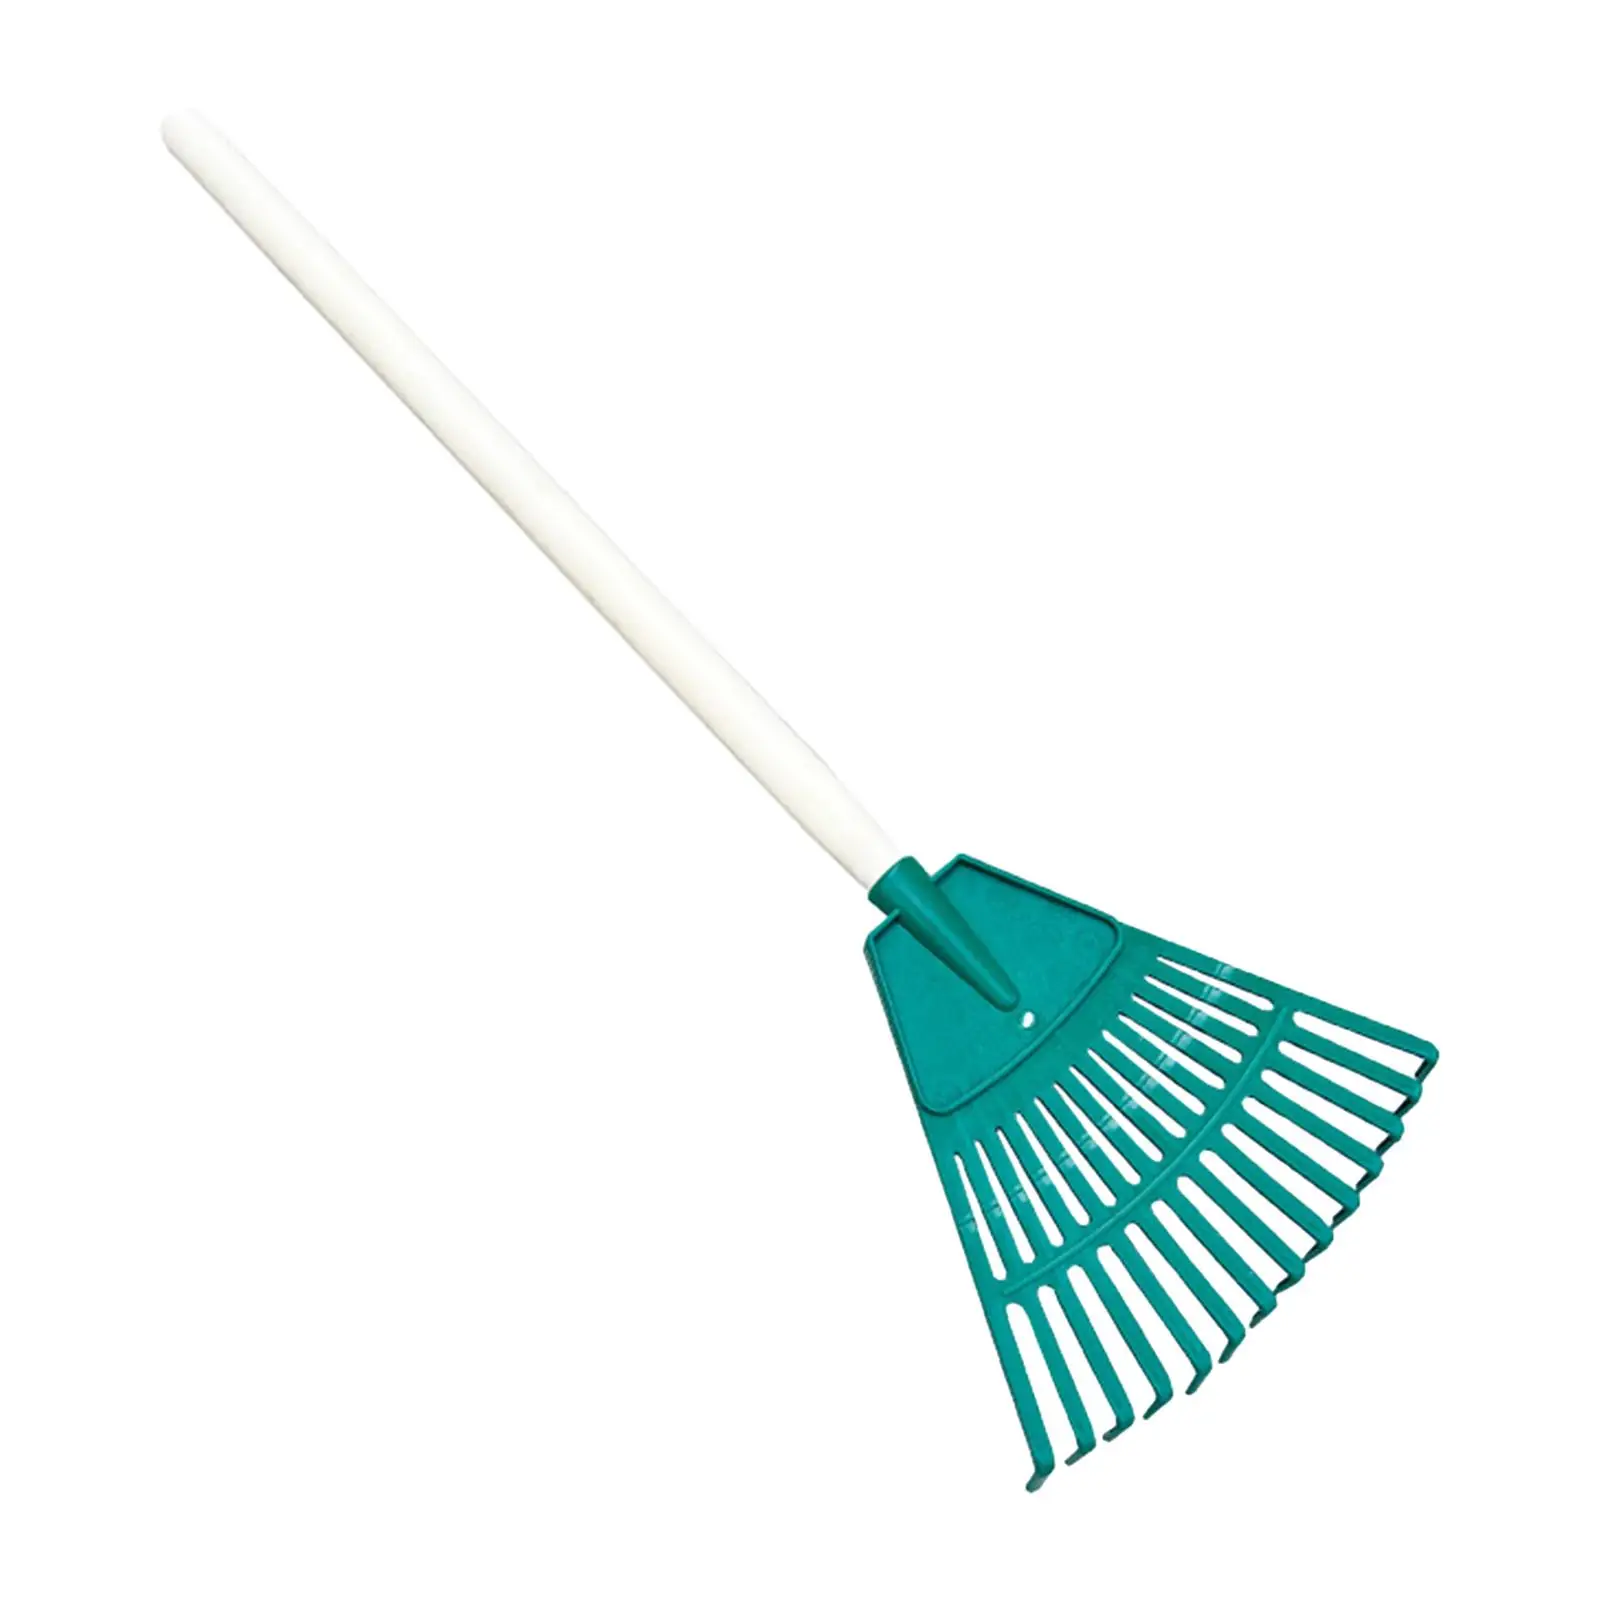 Leaf Rake Detachable Mini Easy on and Off Storage Garden Rakes for Lawns Loosening Soil Grass Grooming Clean up of Plants Yard